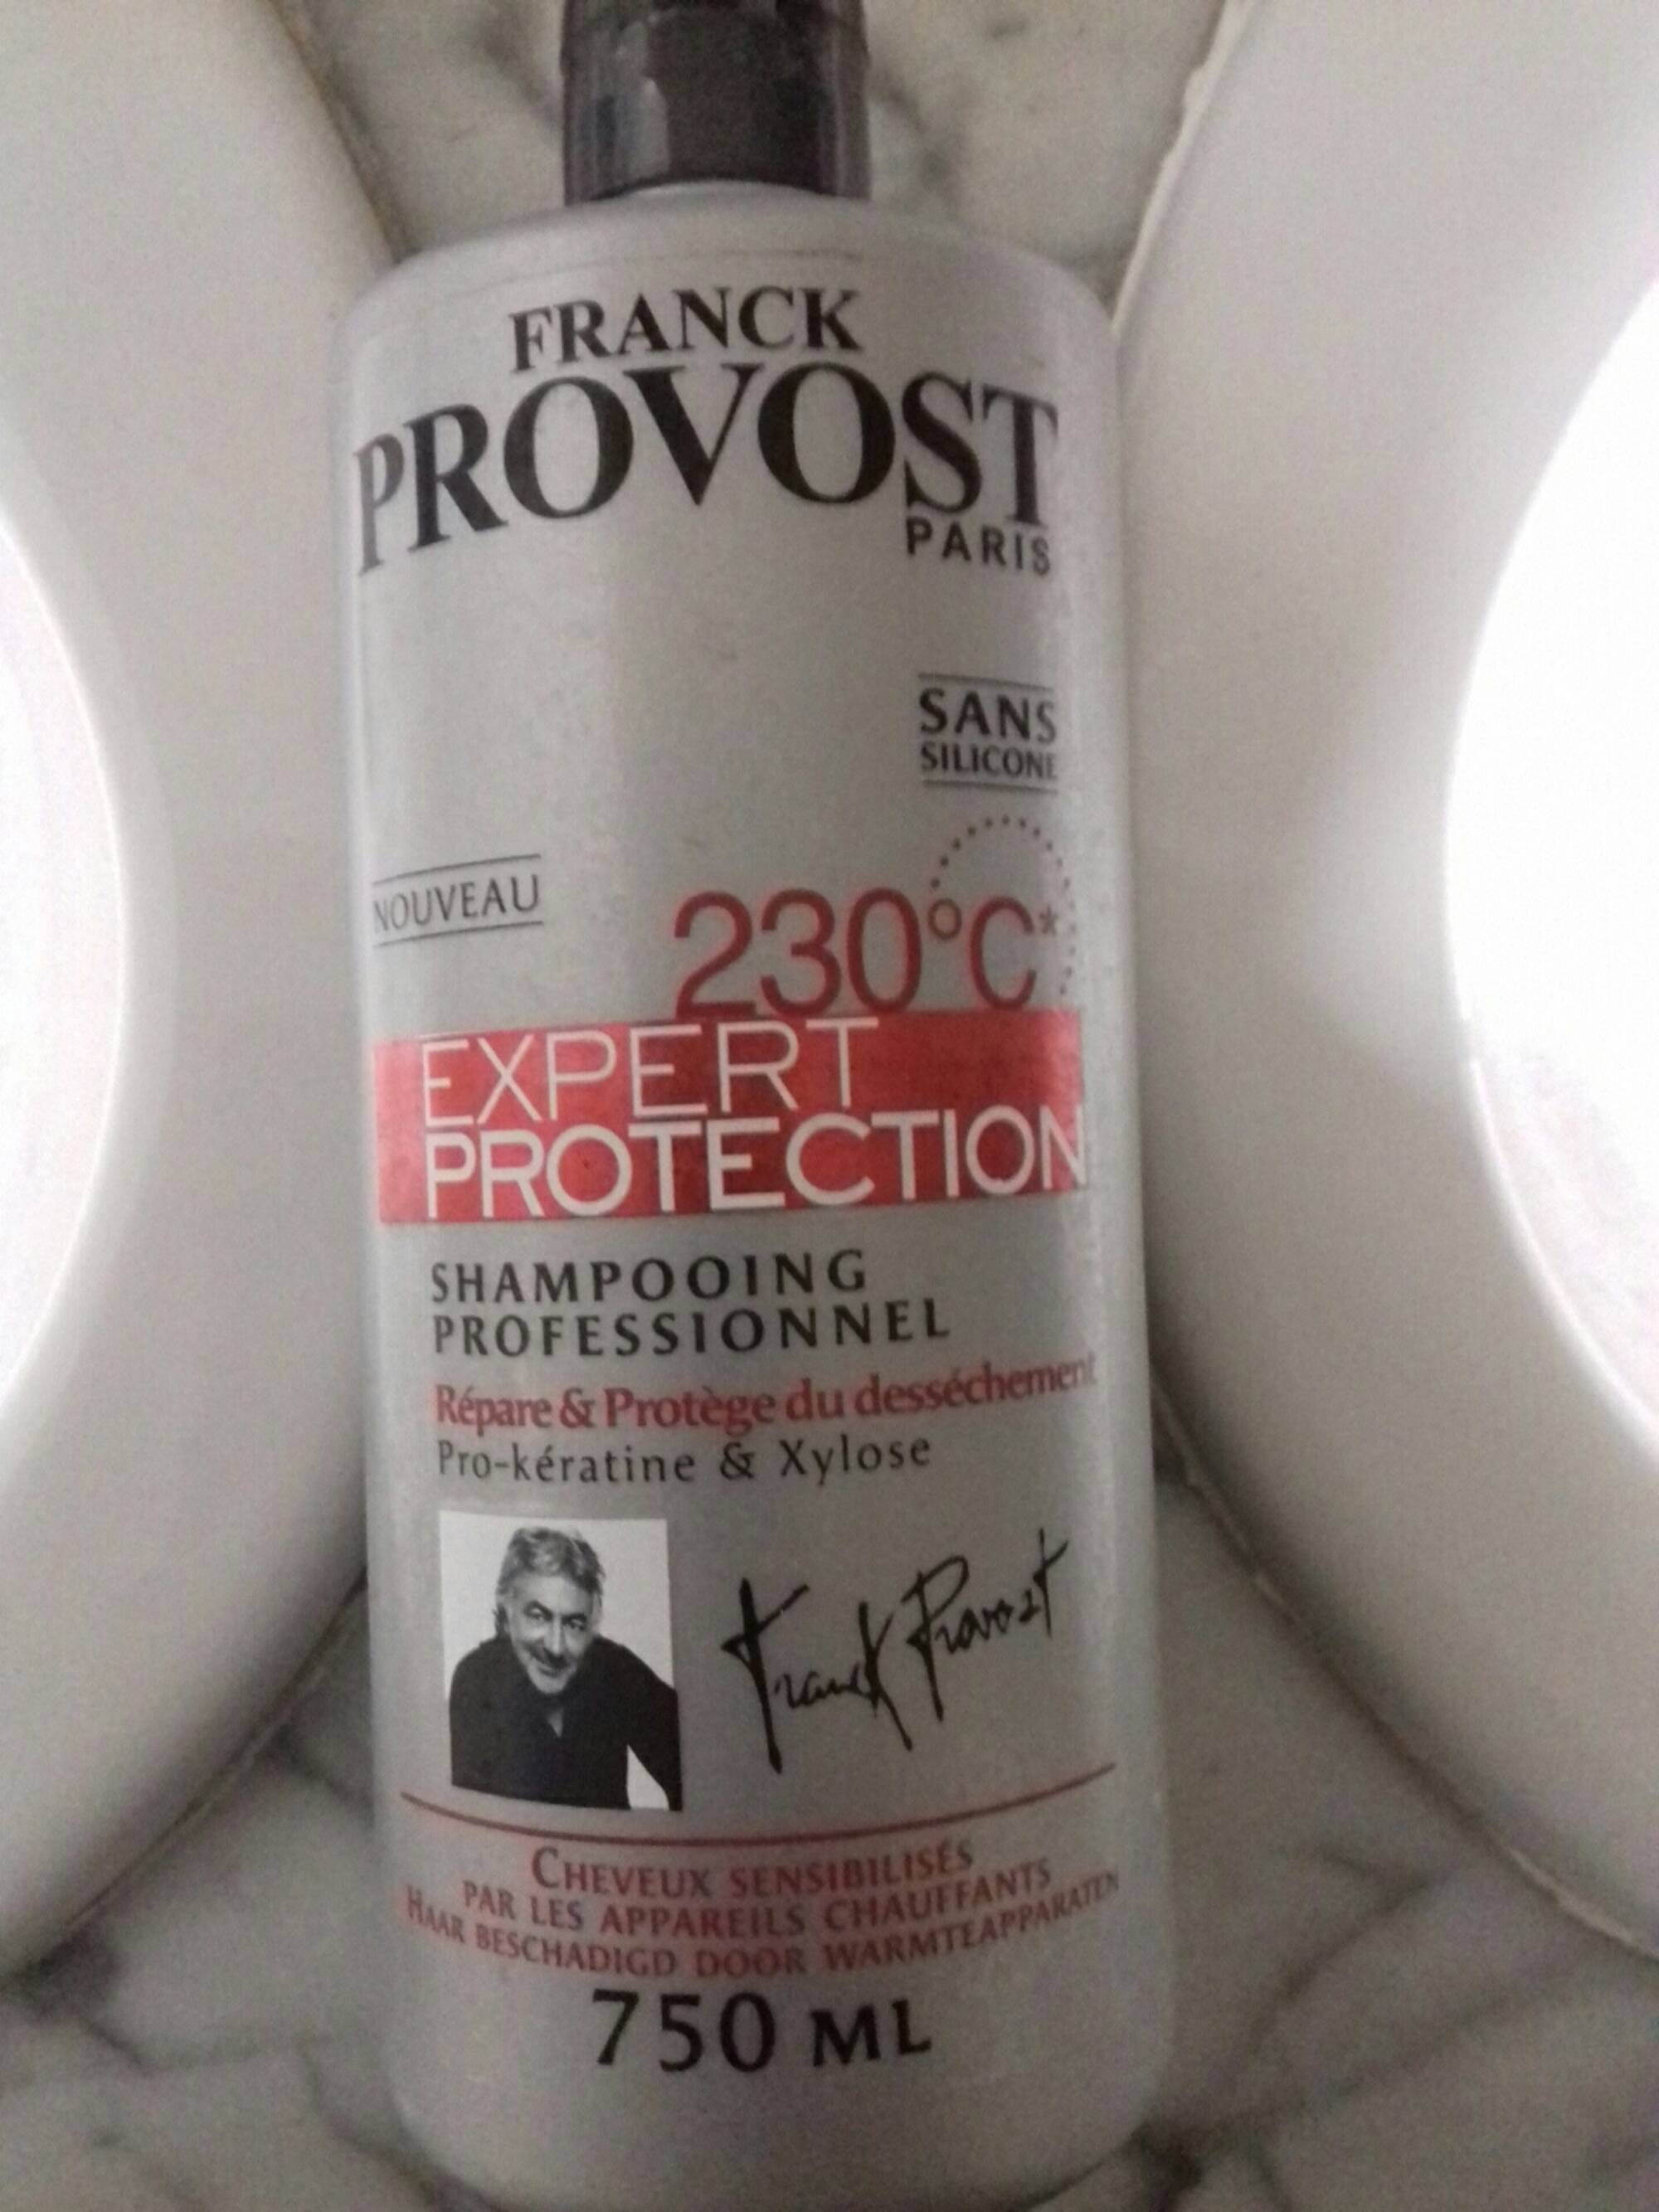 FRANK PROVOST - Expert Protection 230°C - Shampooing professionnel